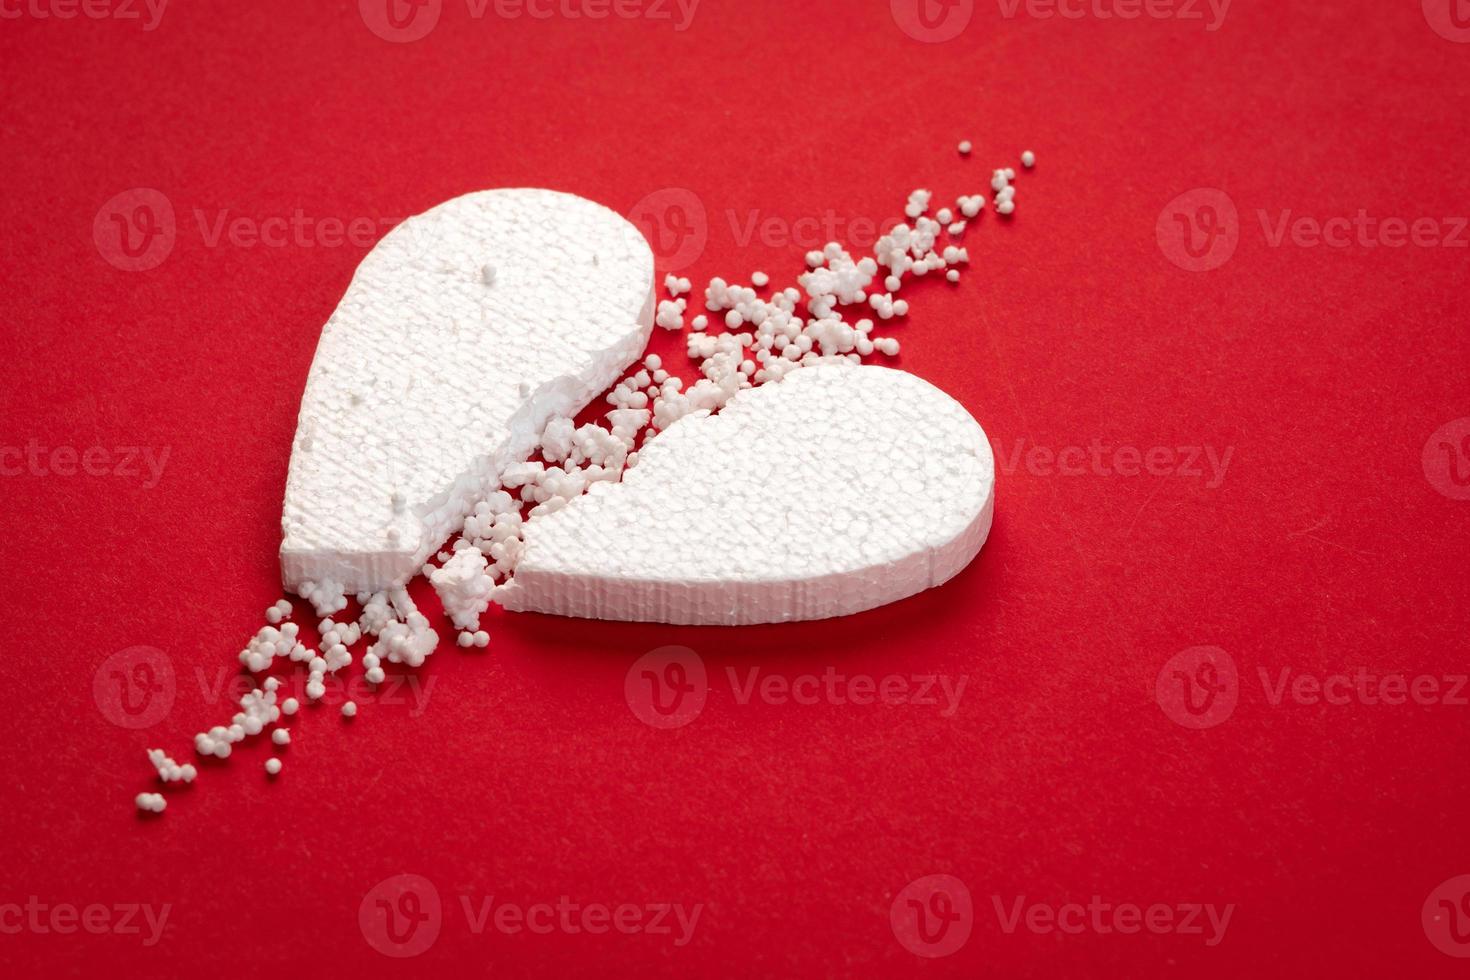 White broken styrofoam heart on a red paper background close up photo